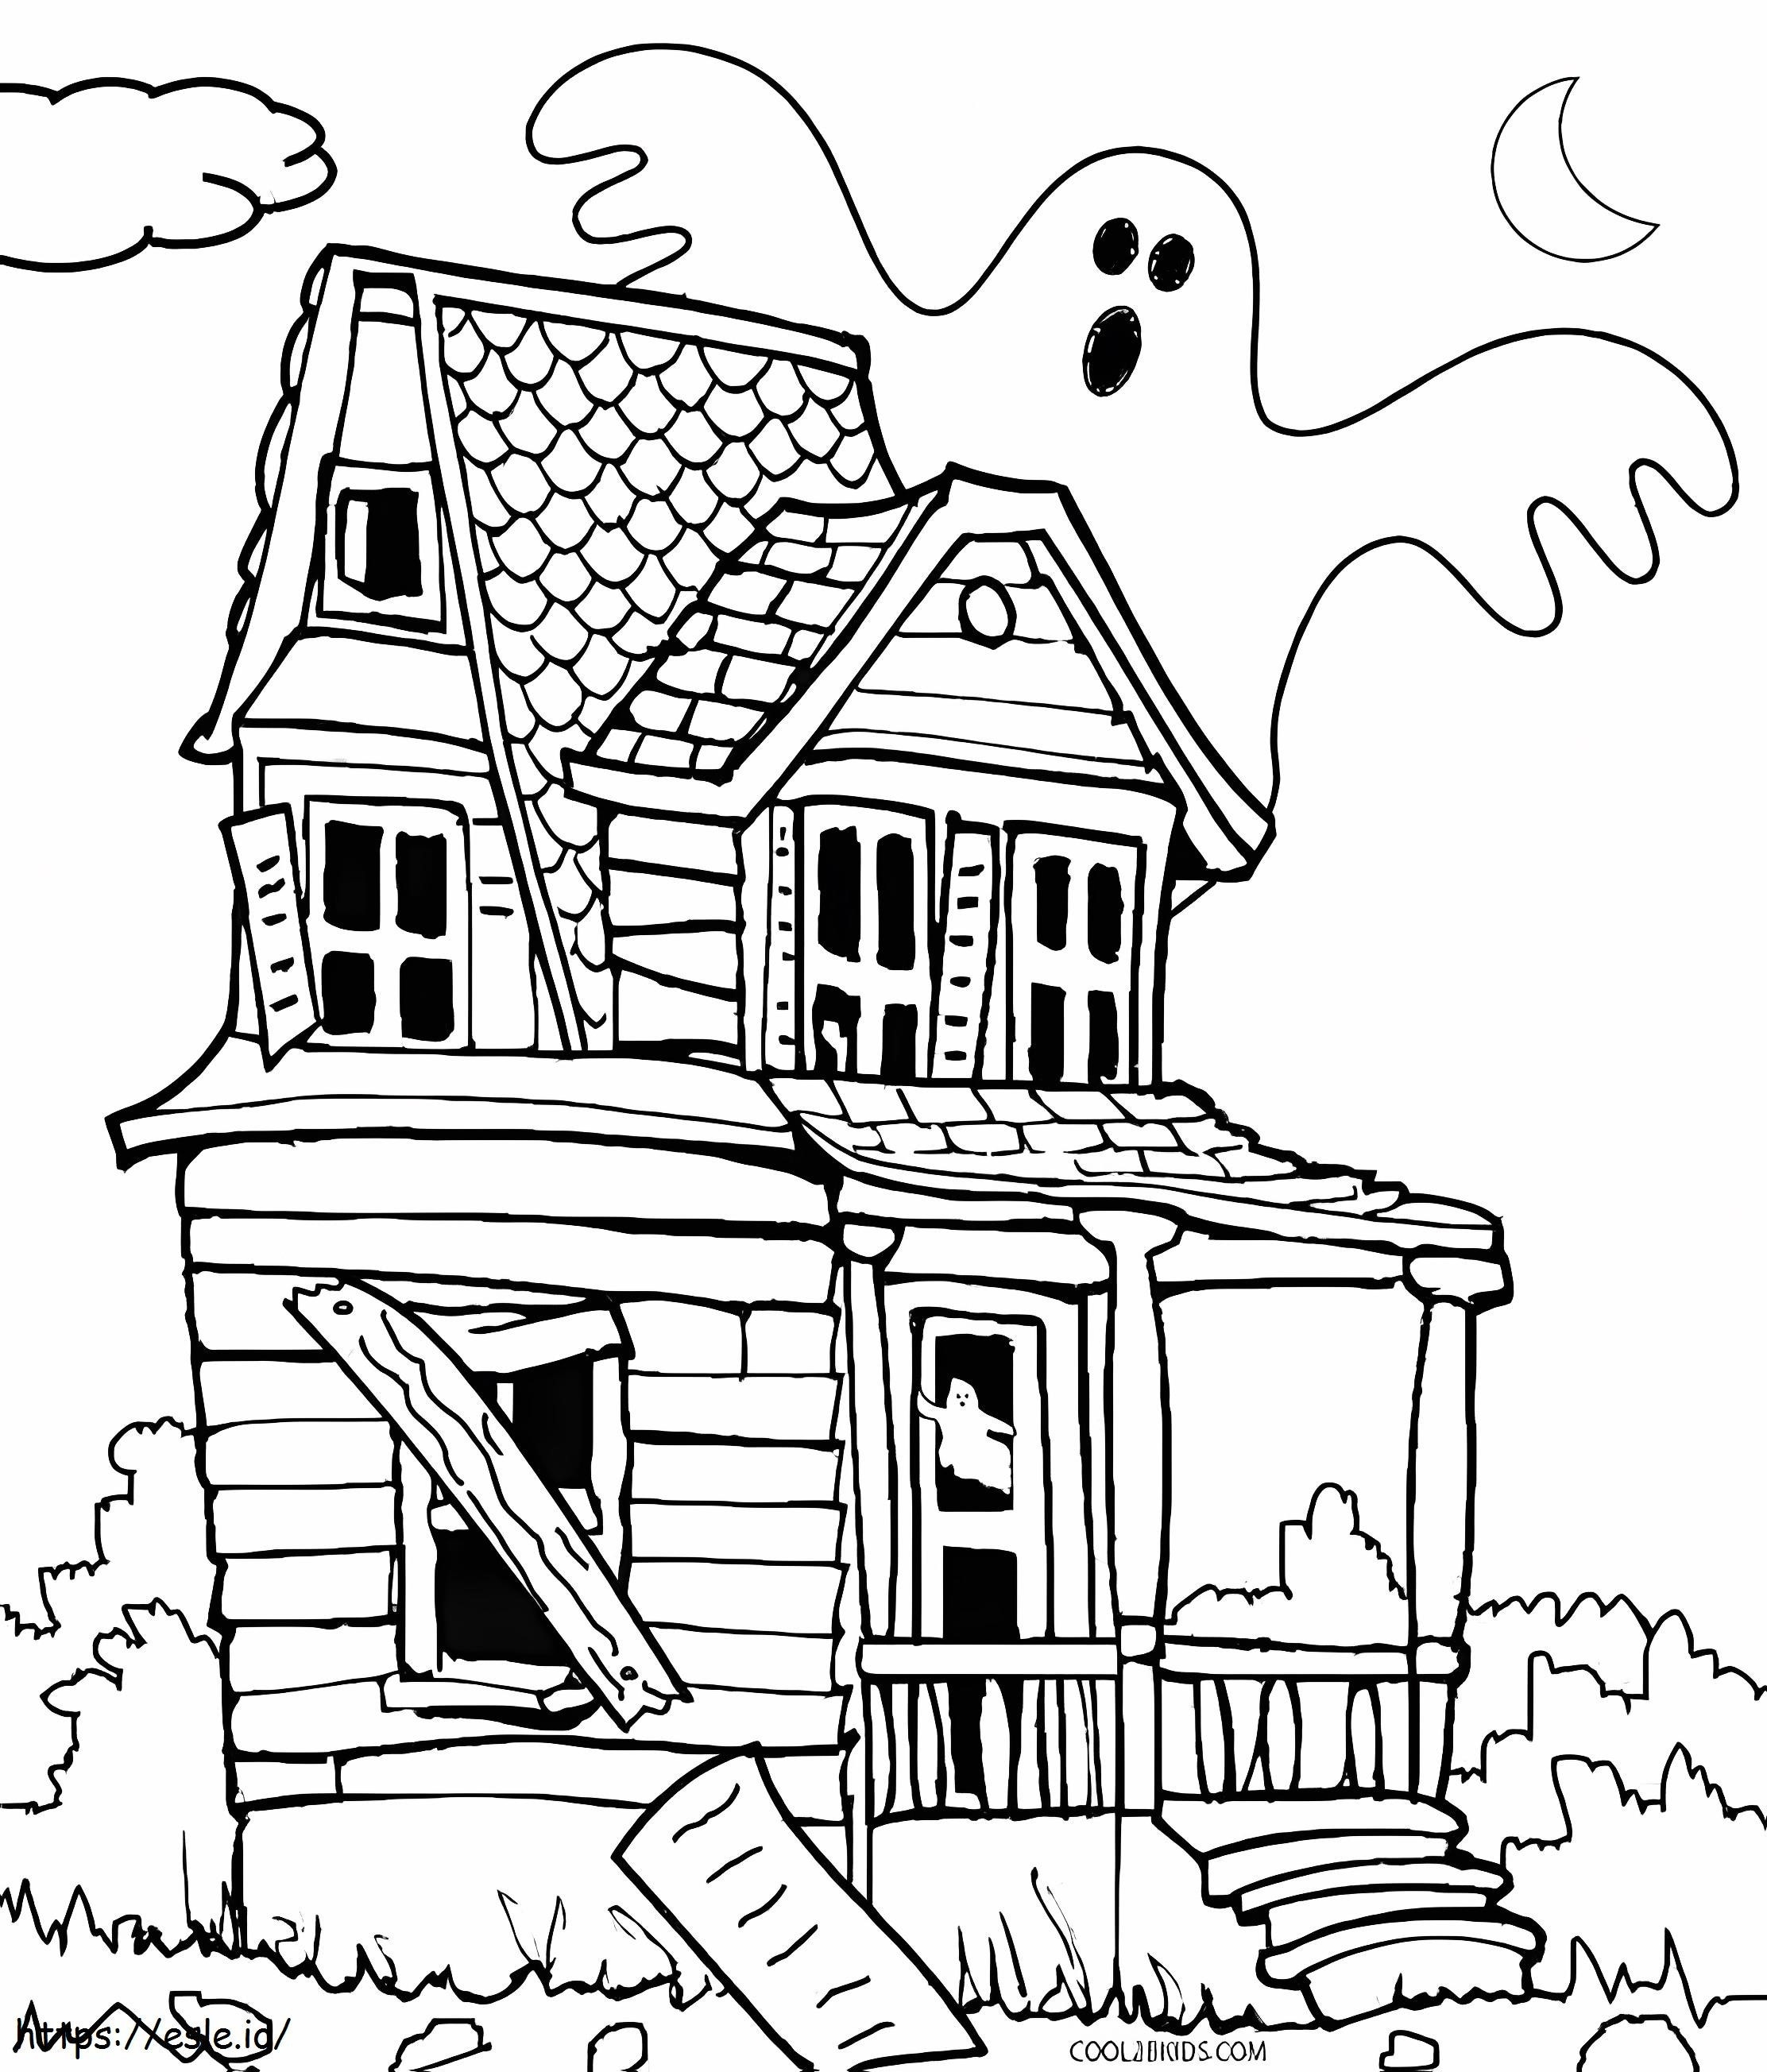 Ghost Haunted House coloring page